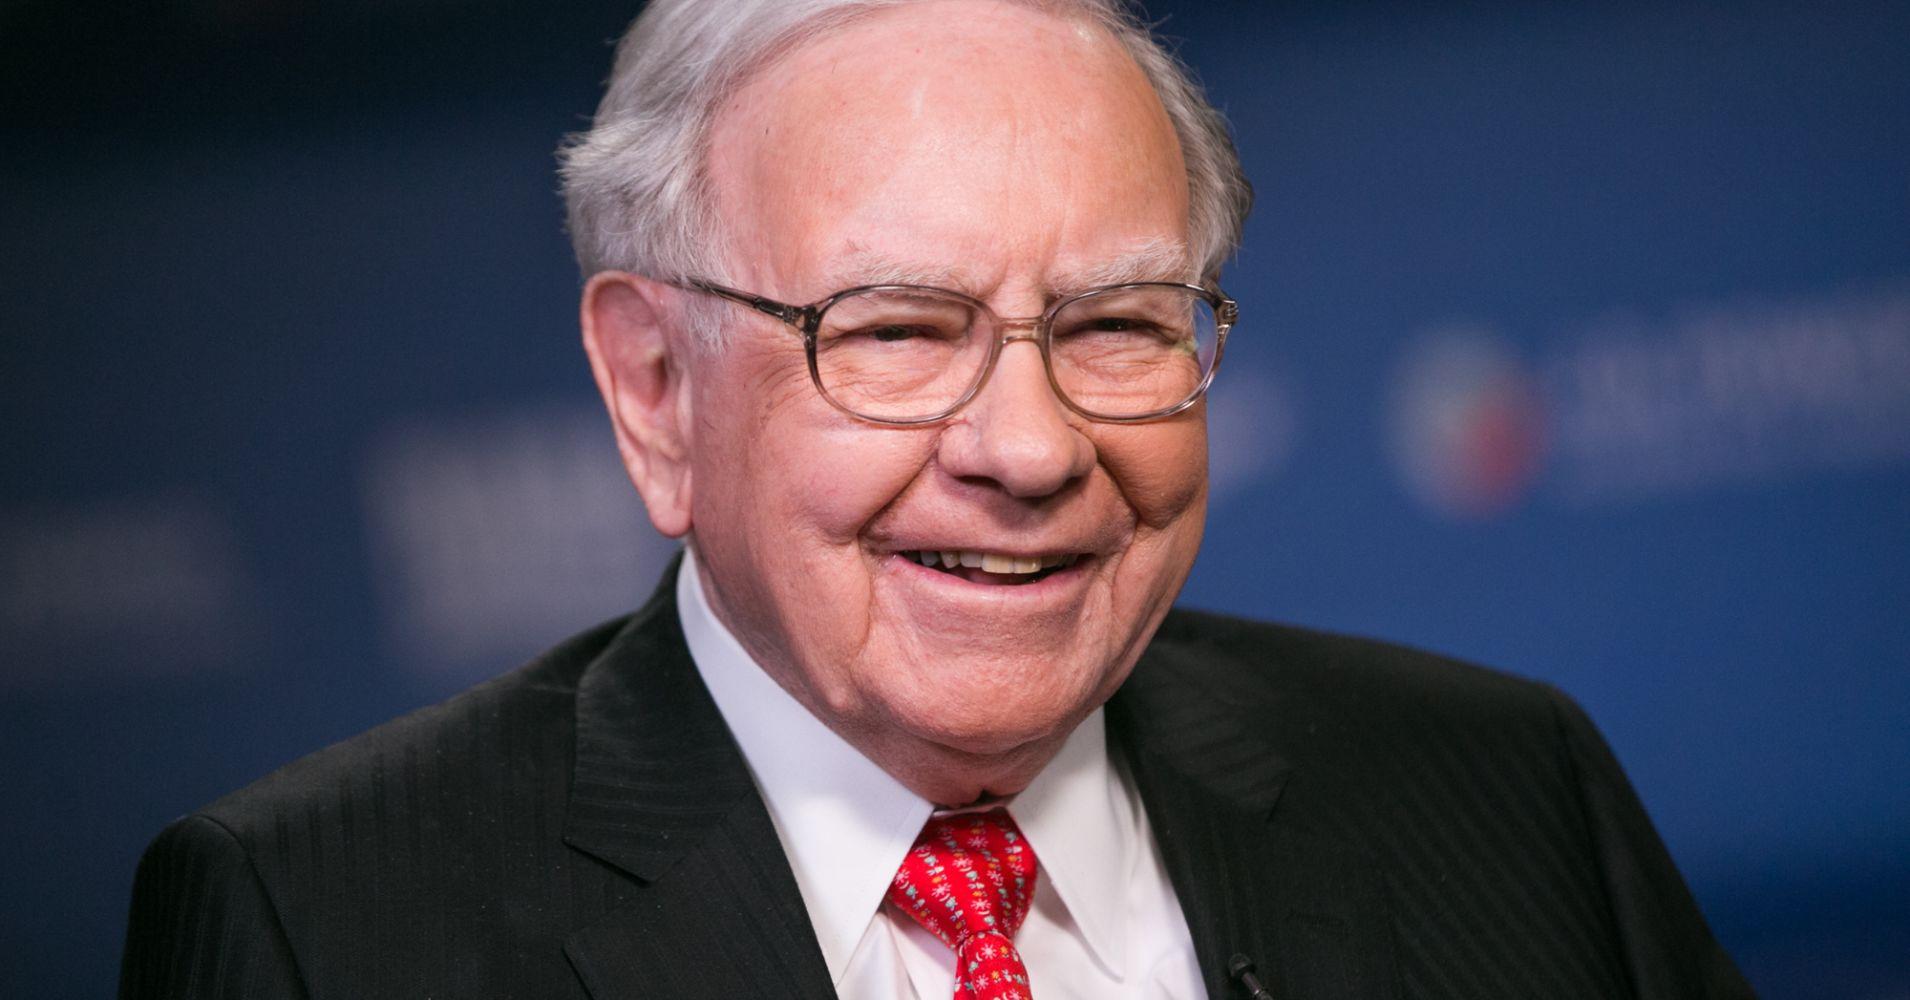 Warren Buffett's key tip for success: Read 500 pages a day